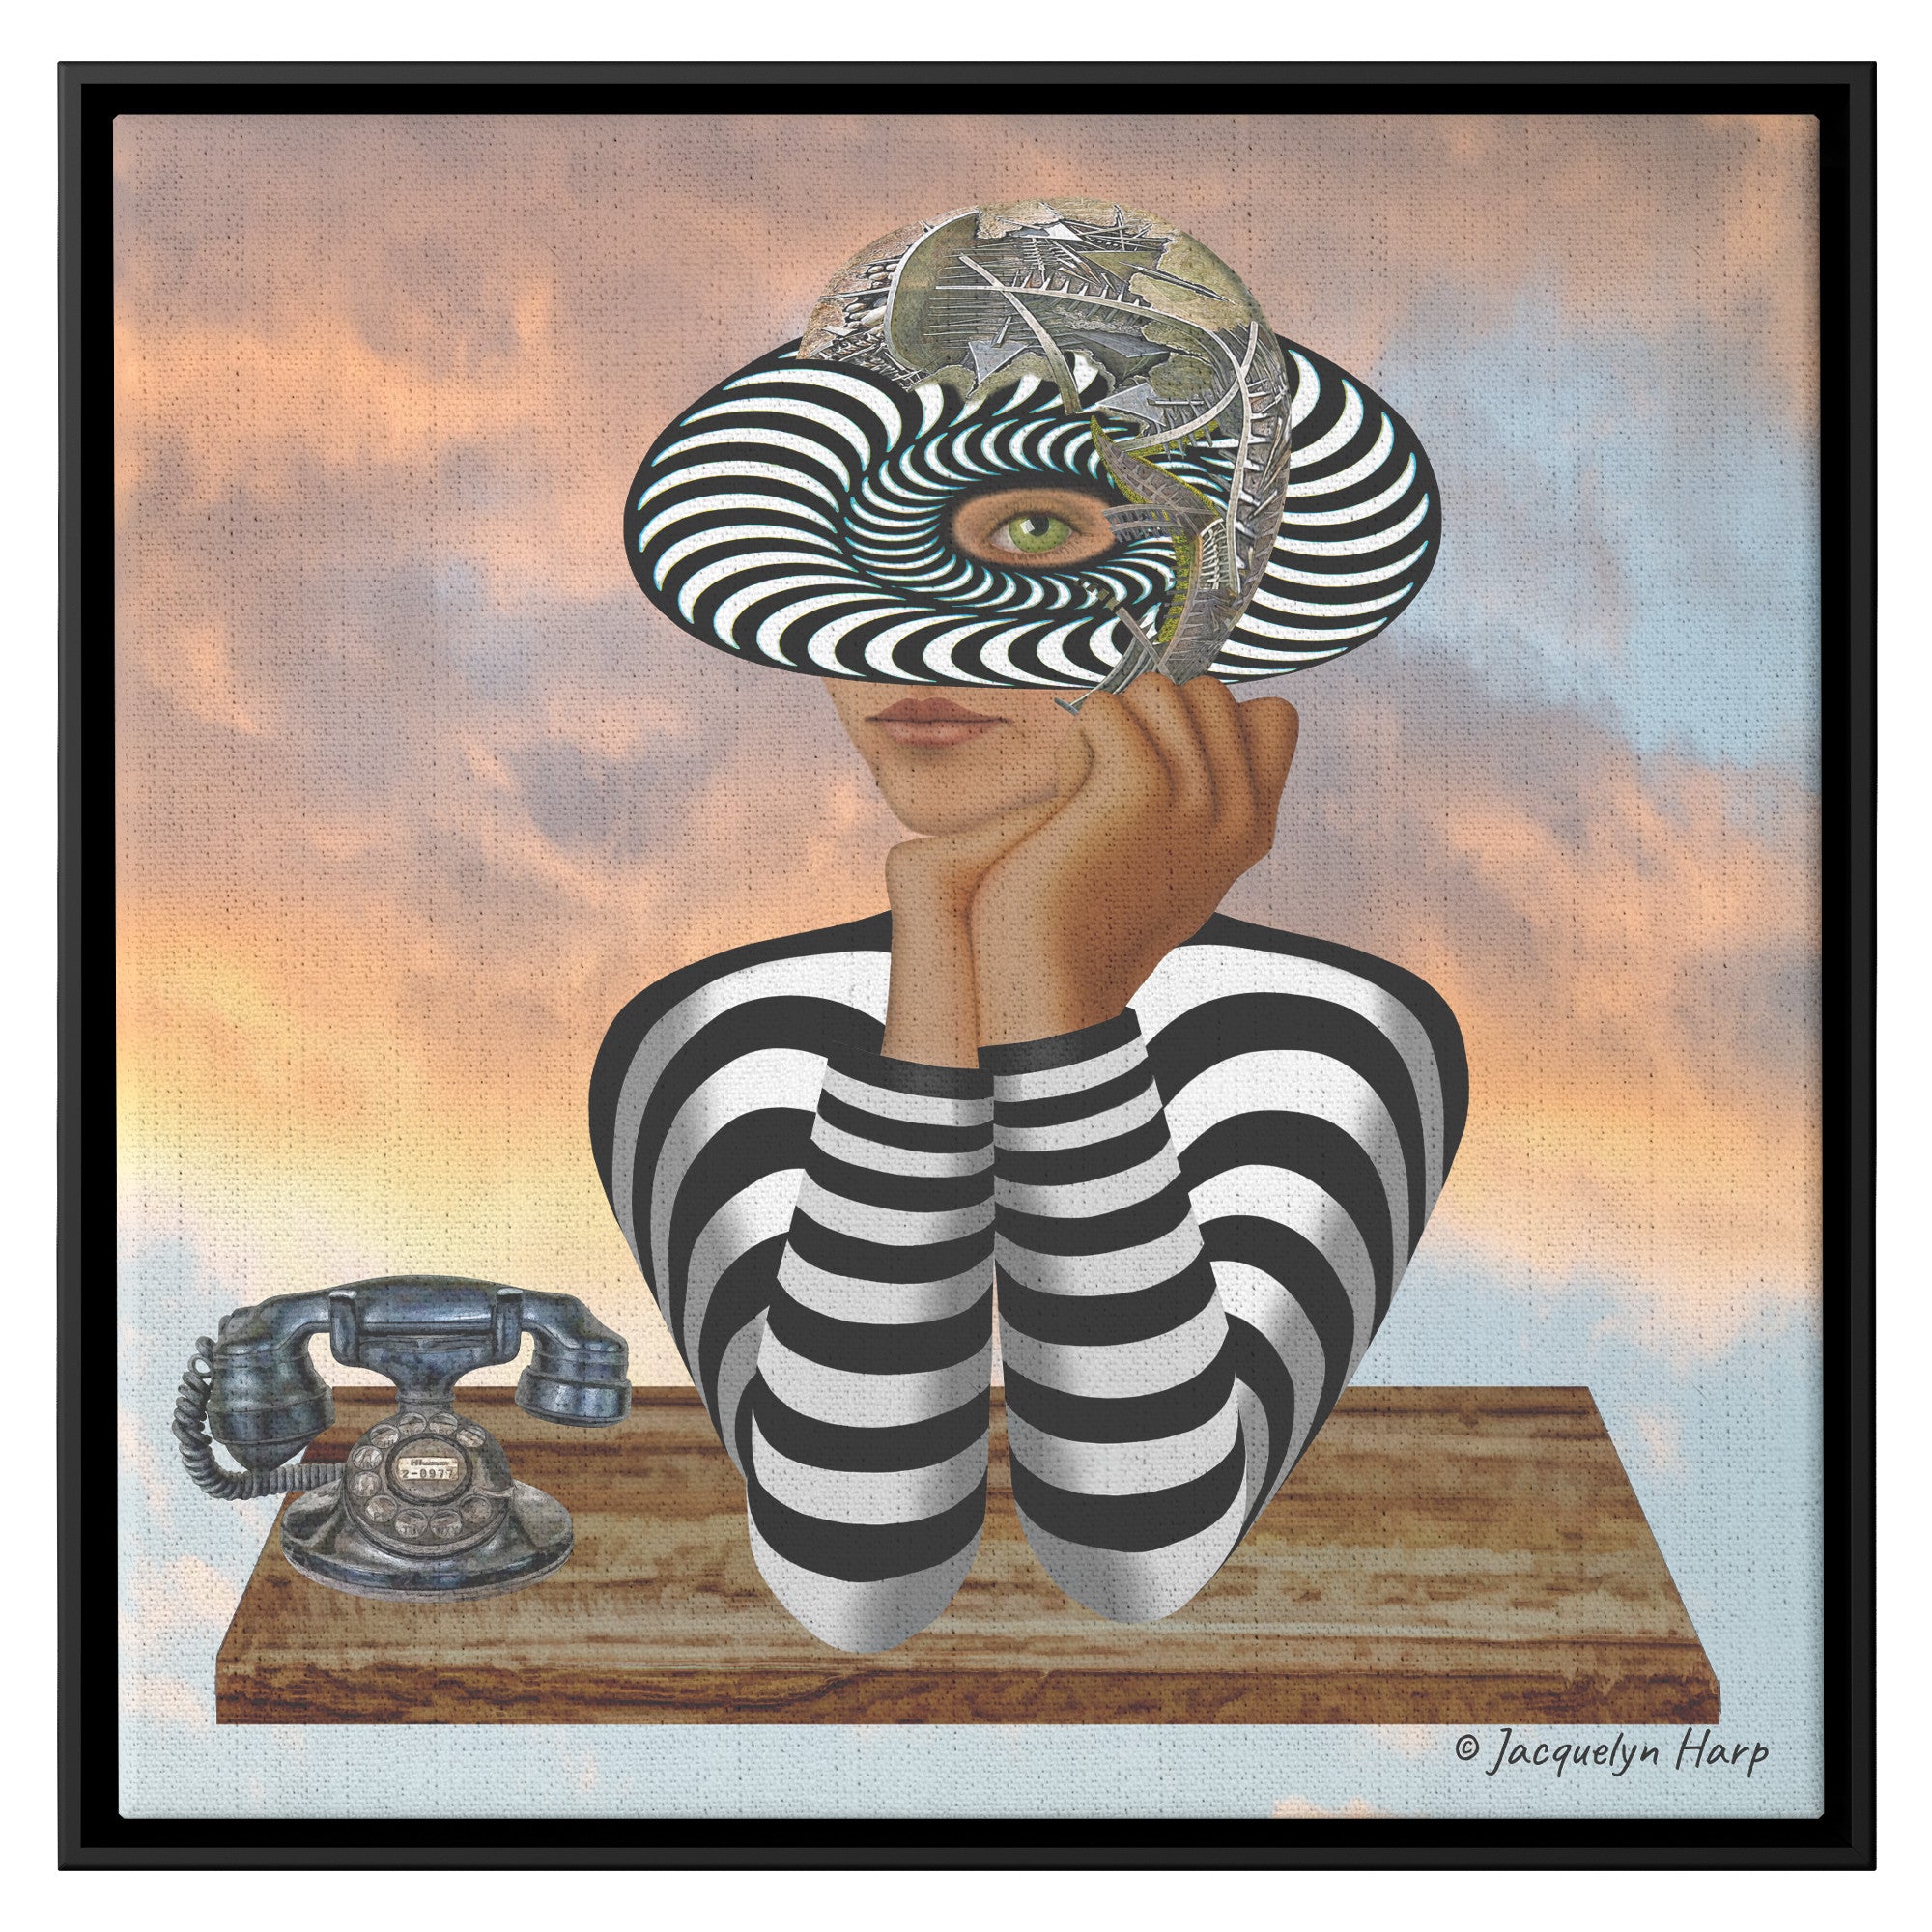 Call Center In The Clouds - Framed Art